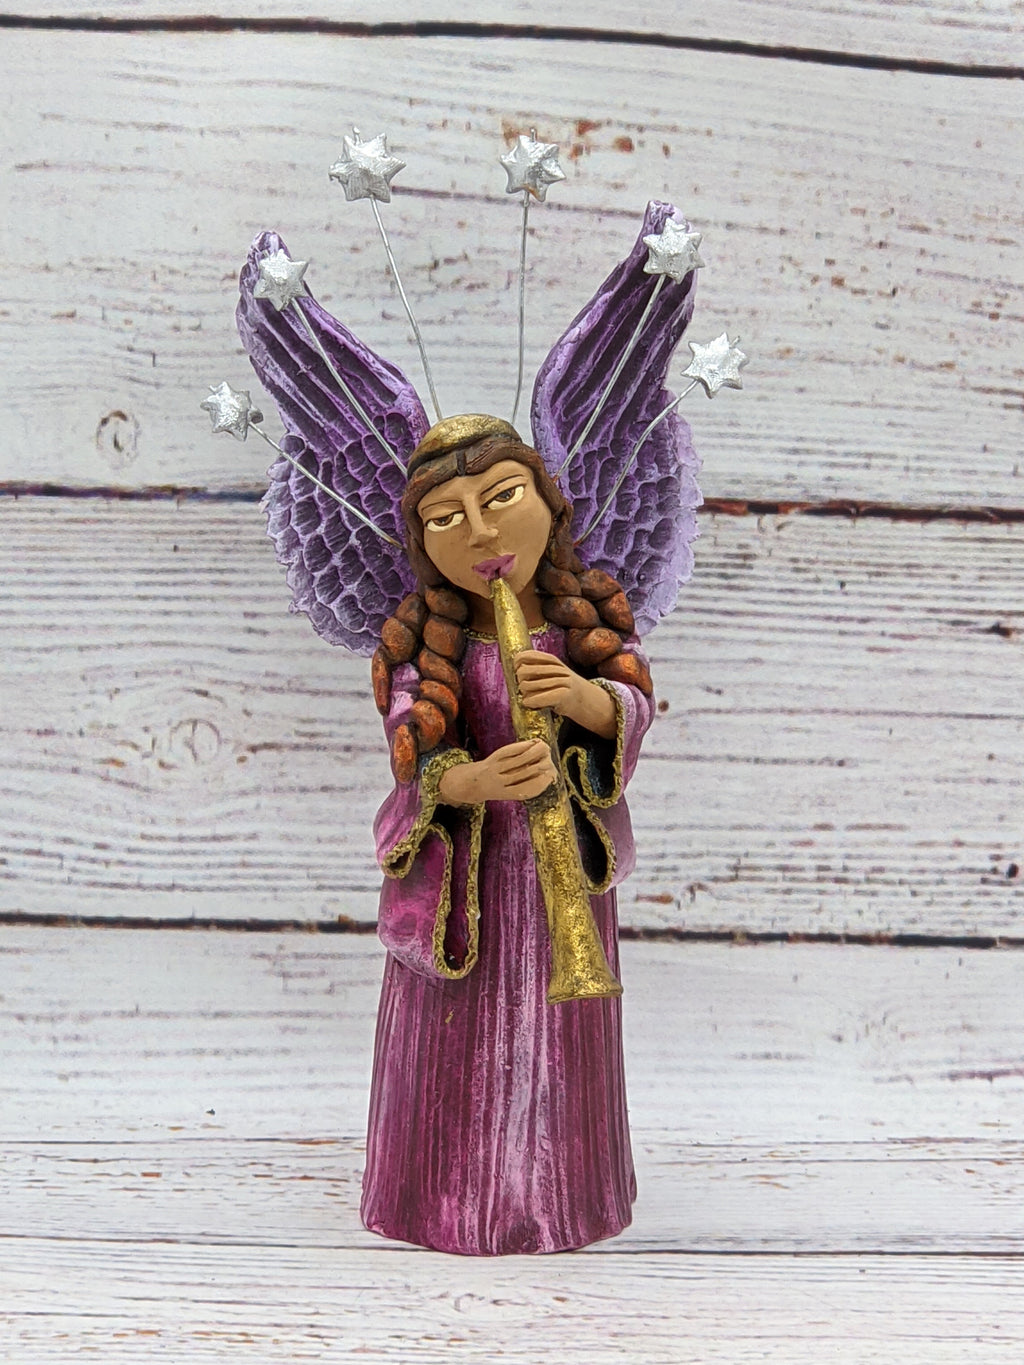 Christmas Decorations, Angel with Oboe, Christmas Angel Home Decor, Handmade Angel Art from Oaxaca Mexico, Original Sculpture